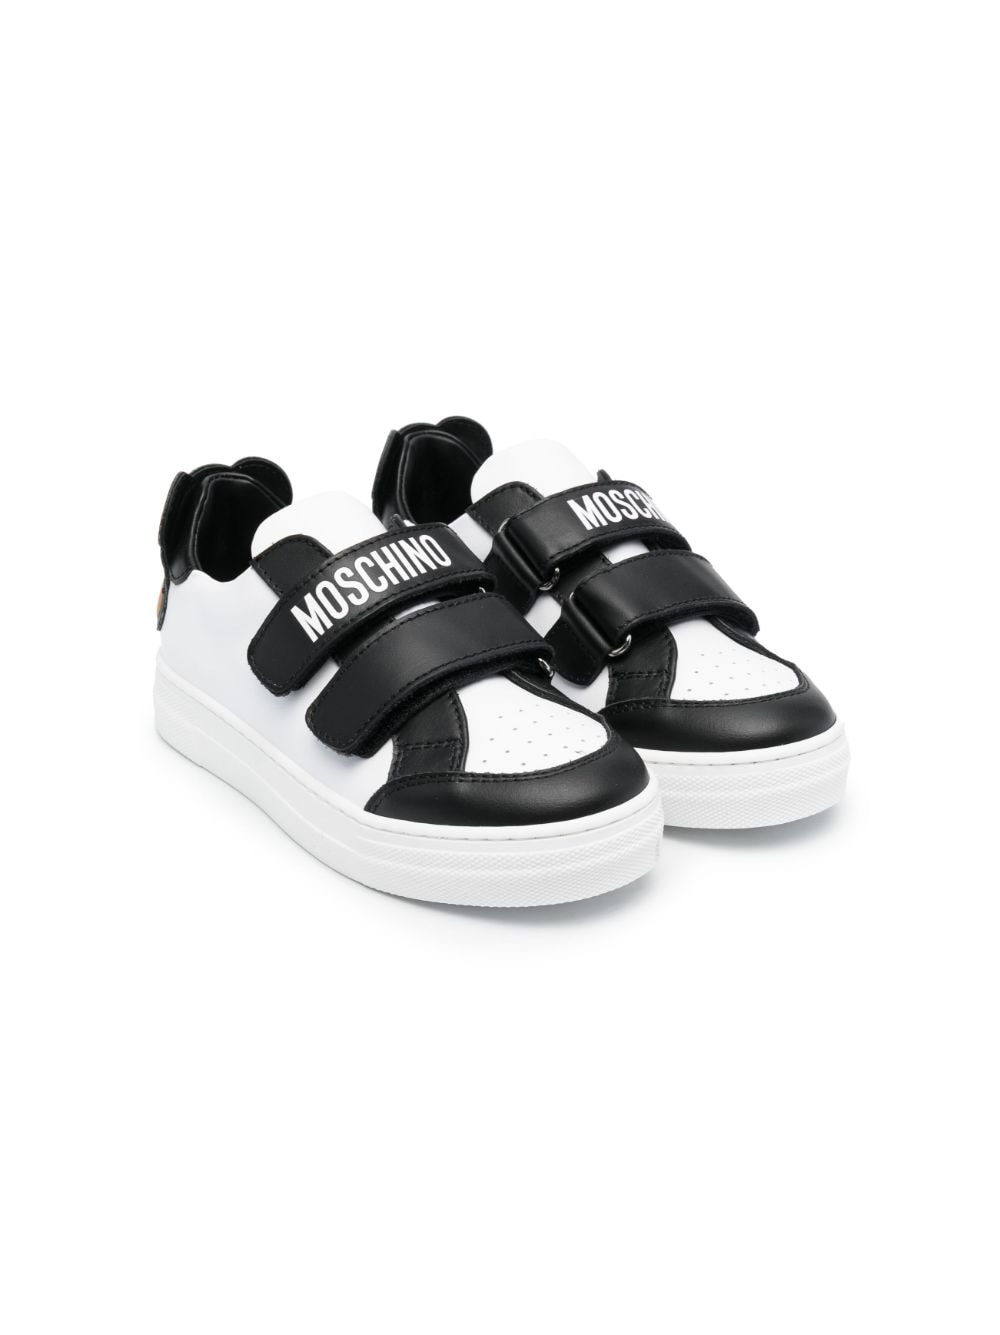 Moschino Kids colour-block low-top sneakers - Black